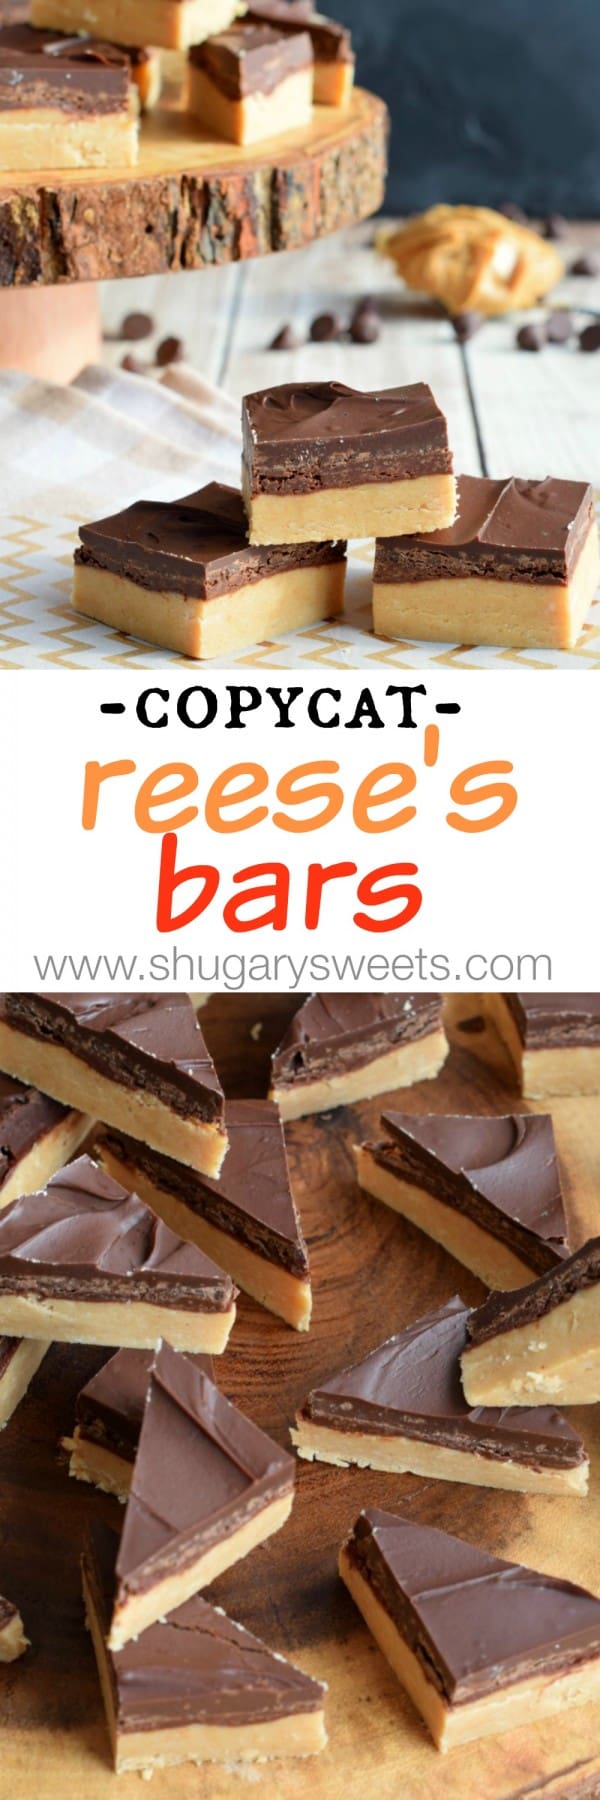 Buckeye Bars: no bake chocolate peanut butter candy that tastes like a Reese's peanut butter cup!